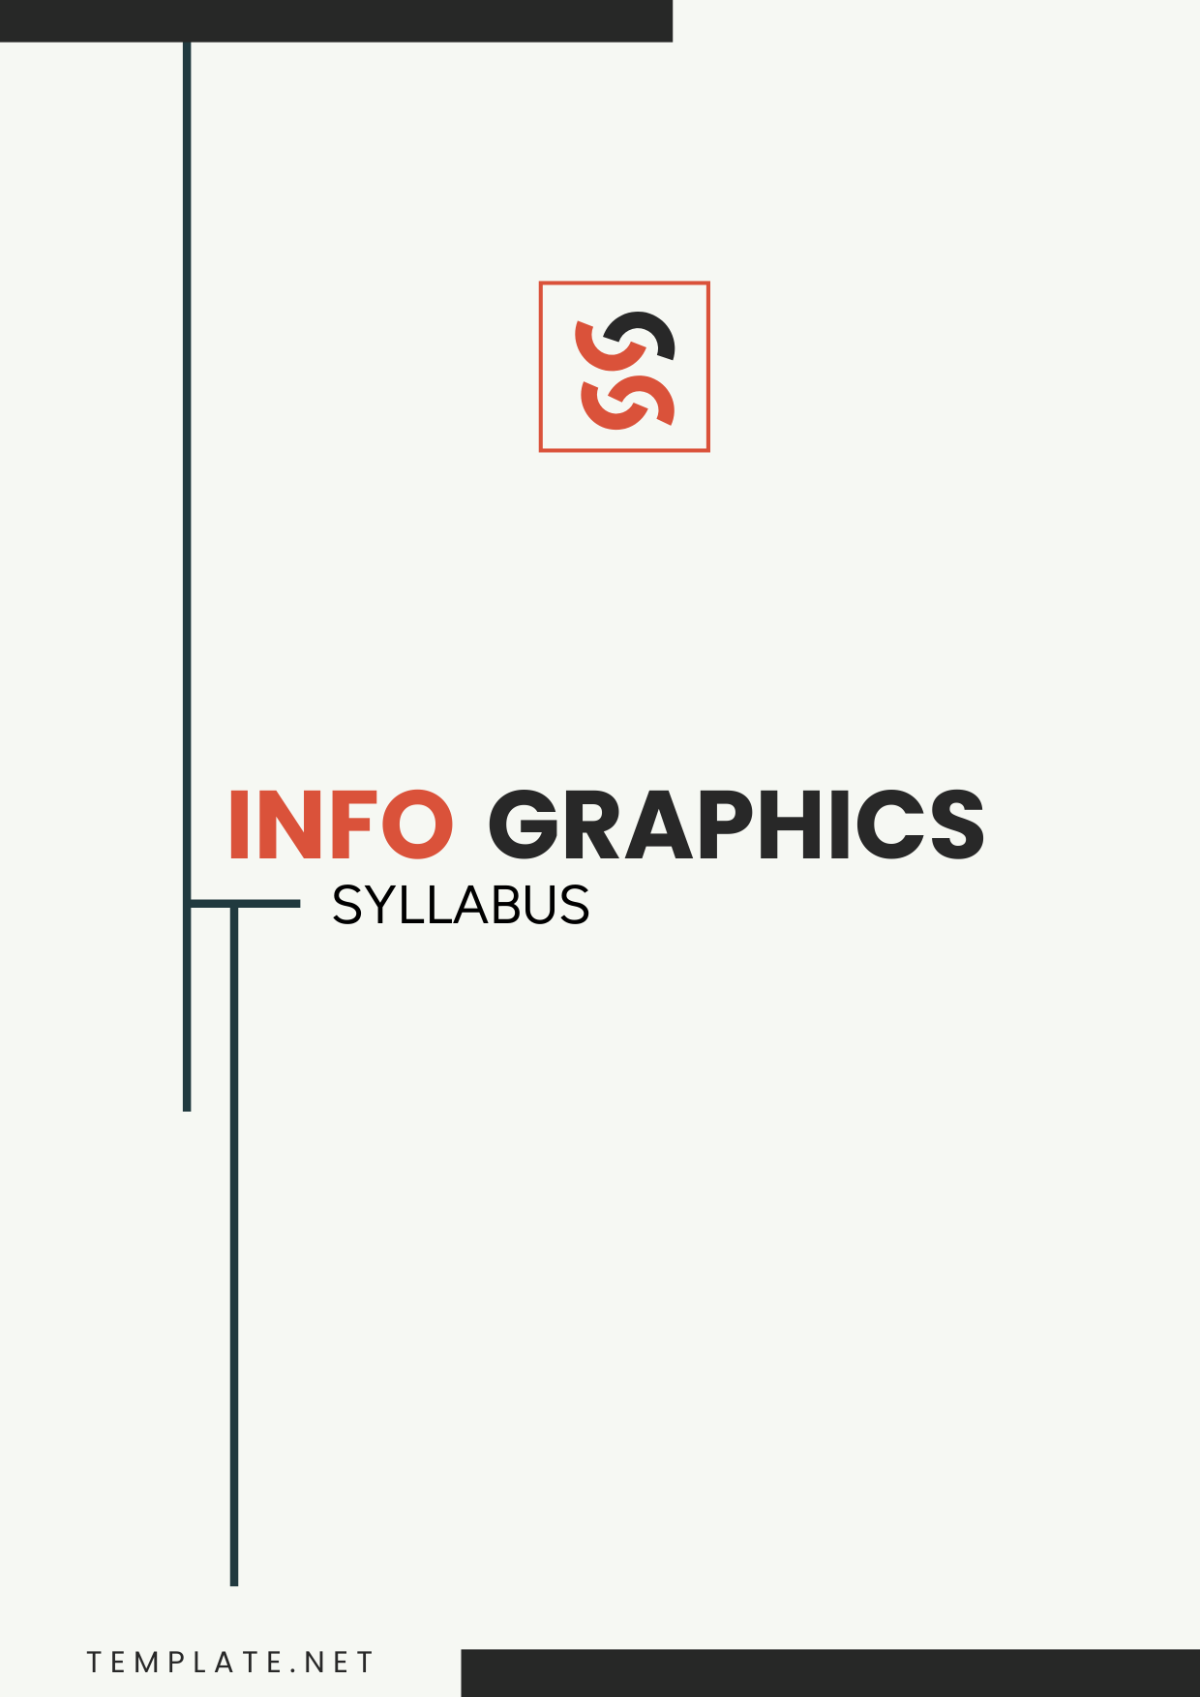 Infographic Syllabus Cover Page